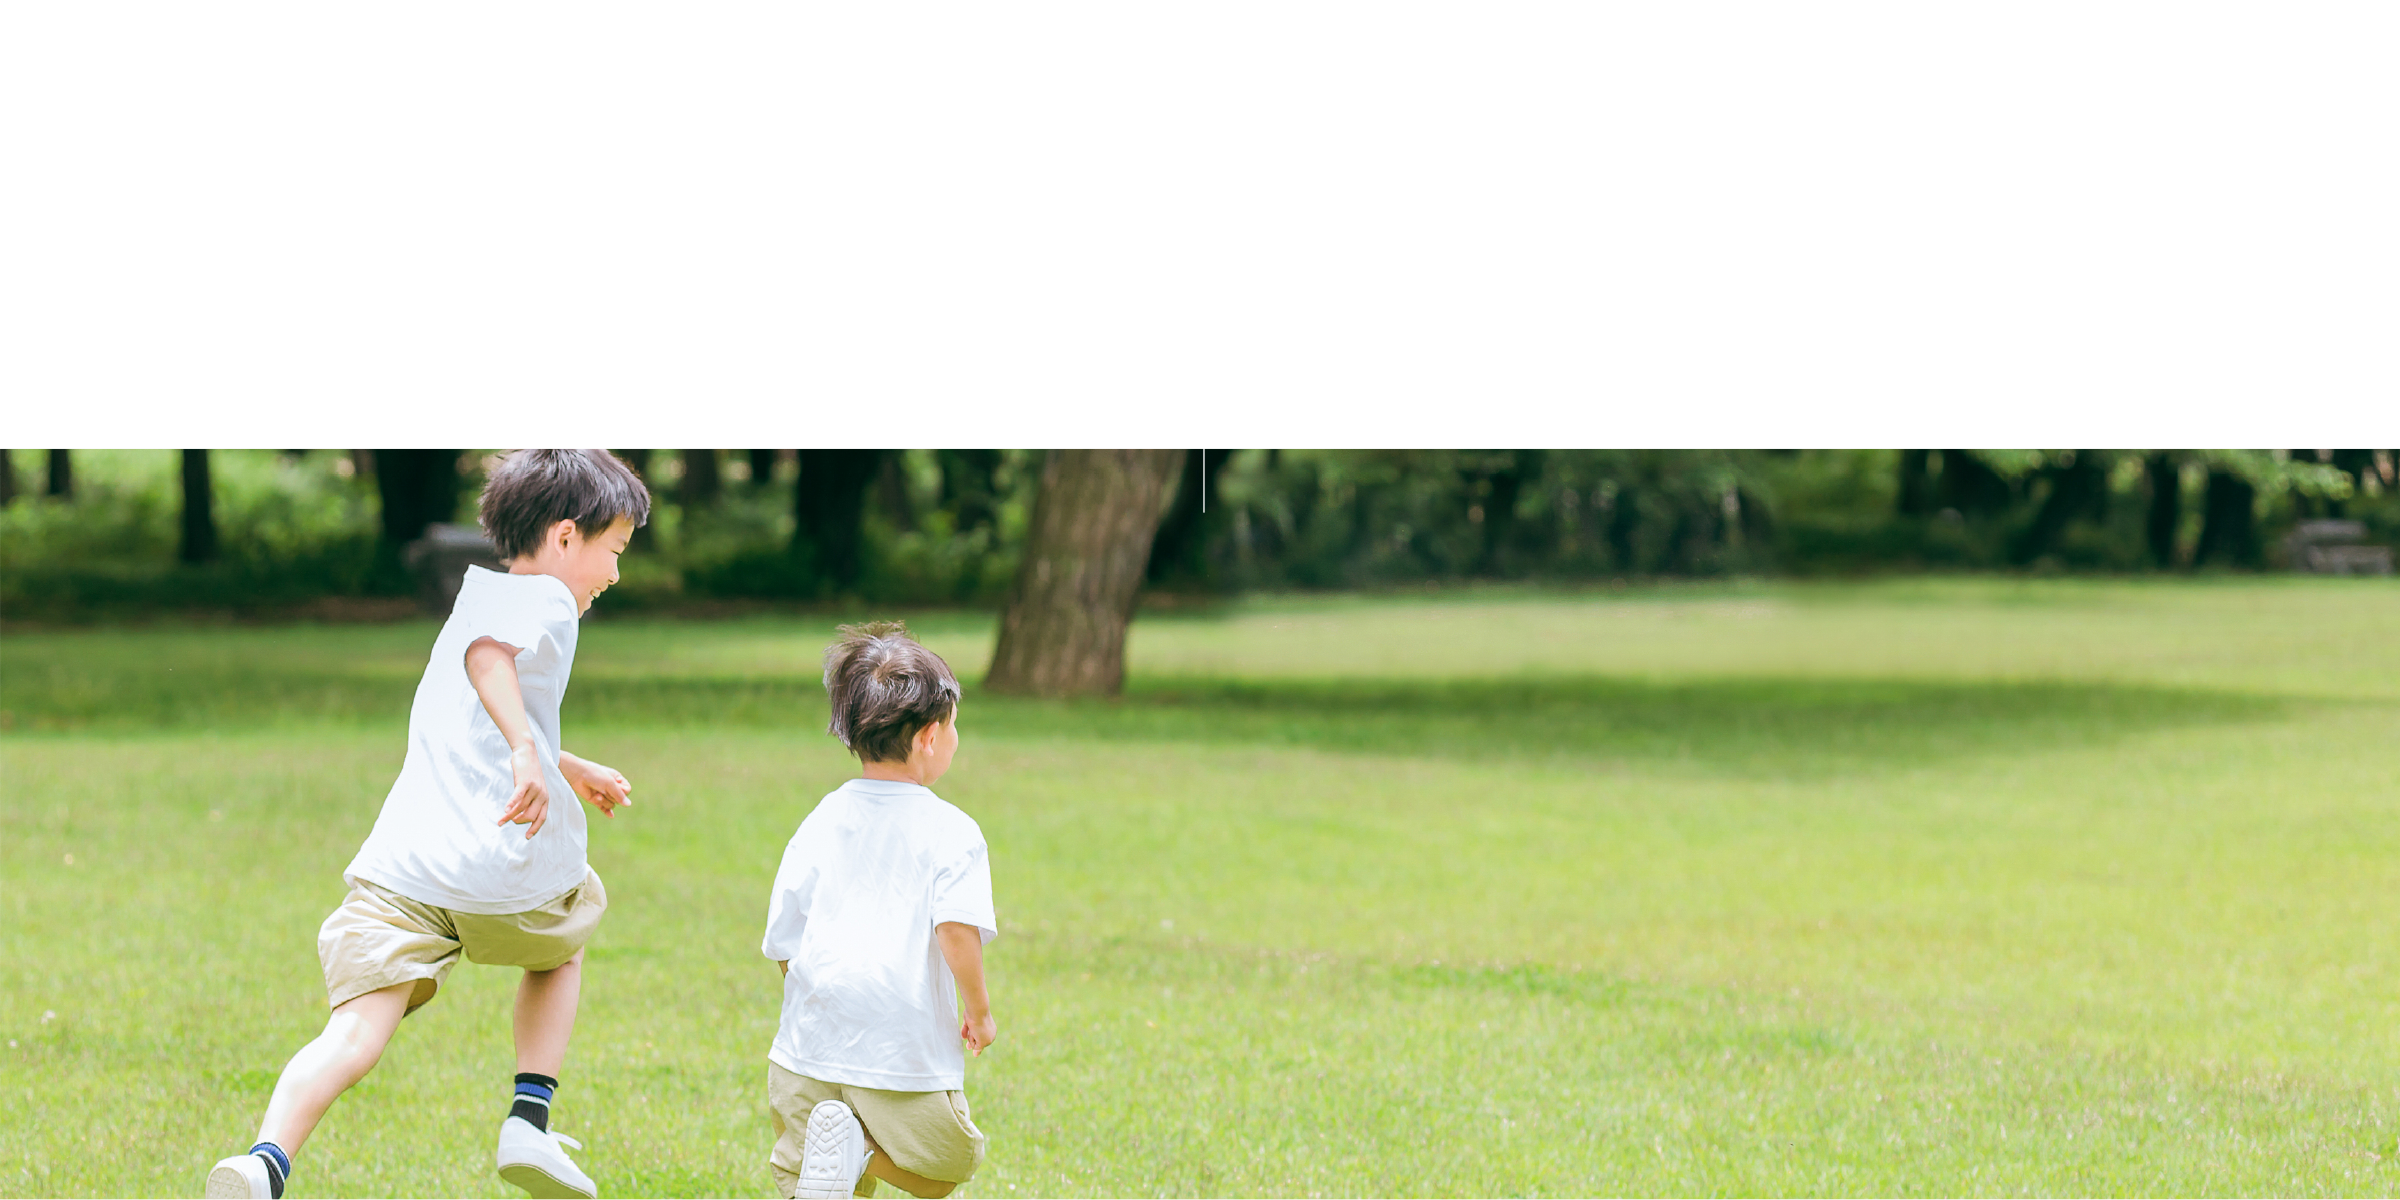 PARK and CULTURE